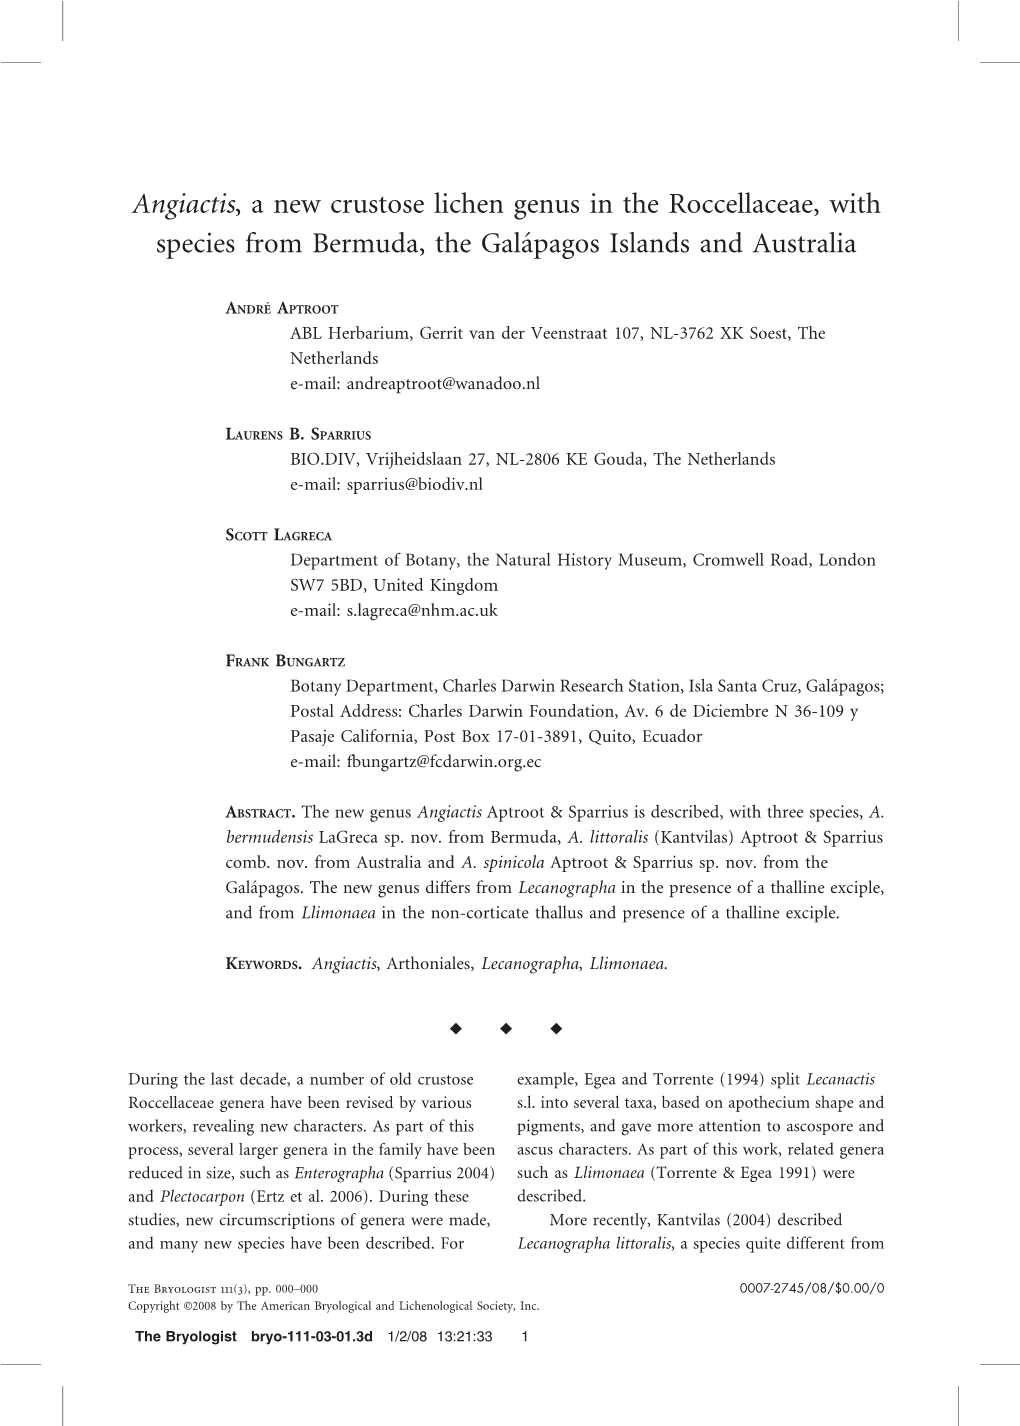 Angiactis, a New Crustose Lichen Genus in the Roccellaceae, with Species from Bermuda, the Galápagos Islands and Australia